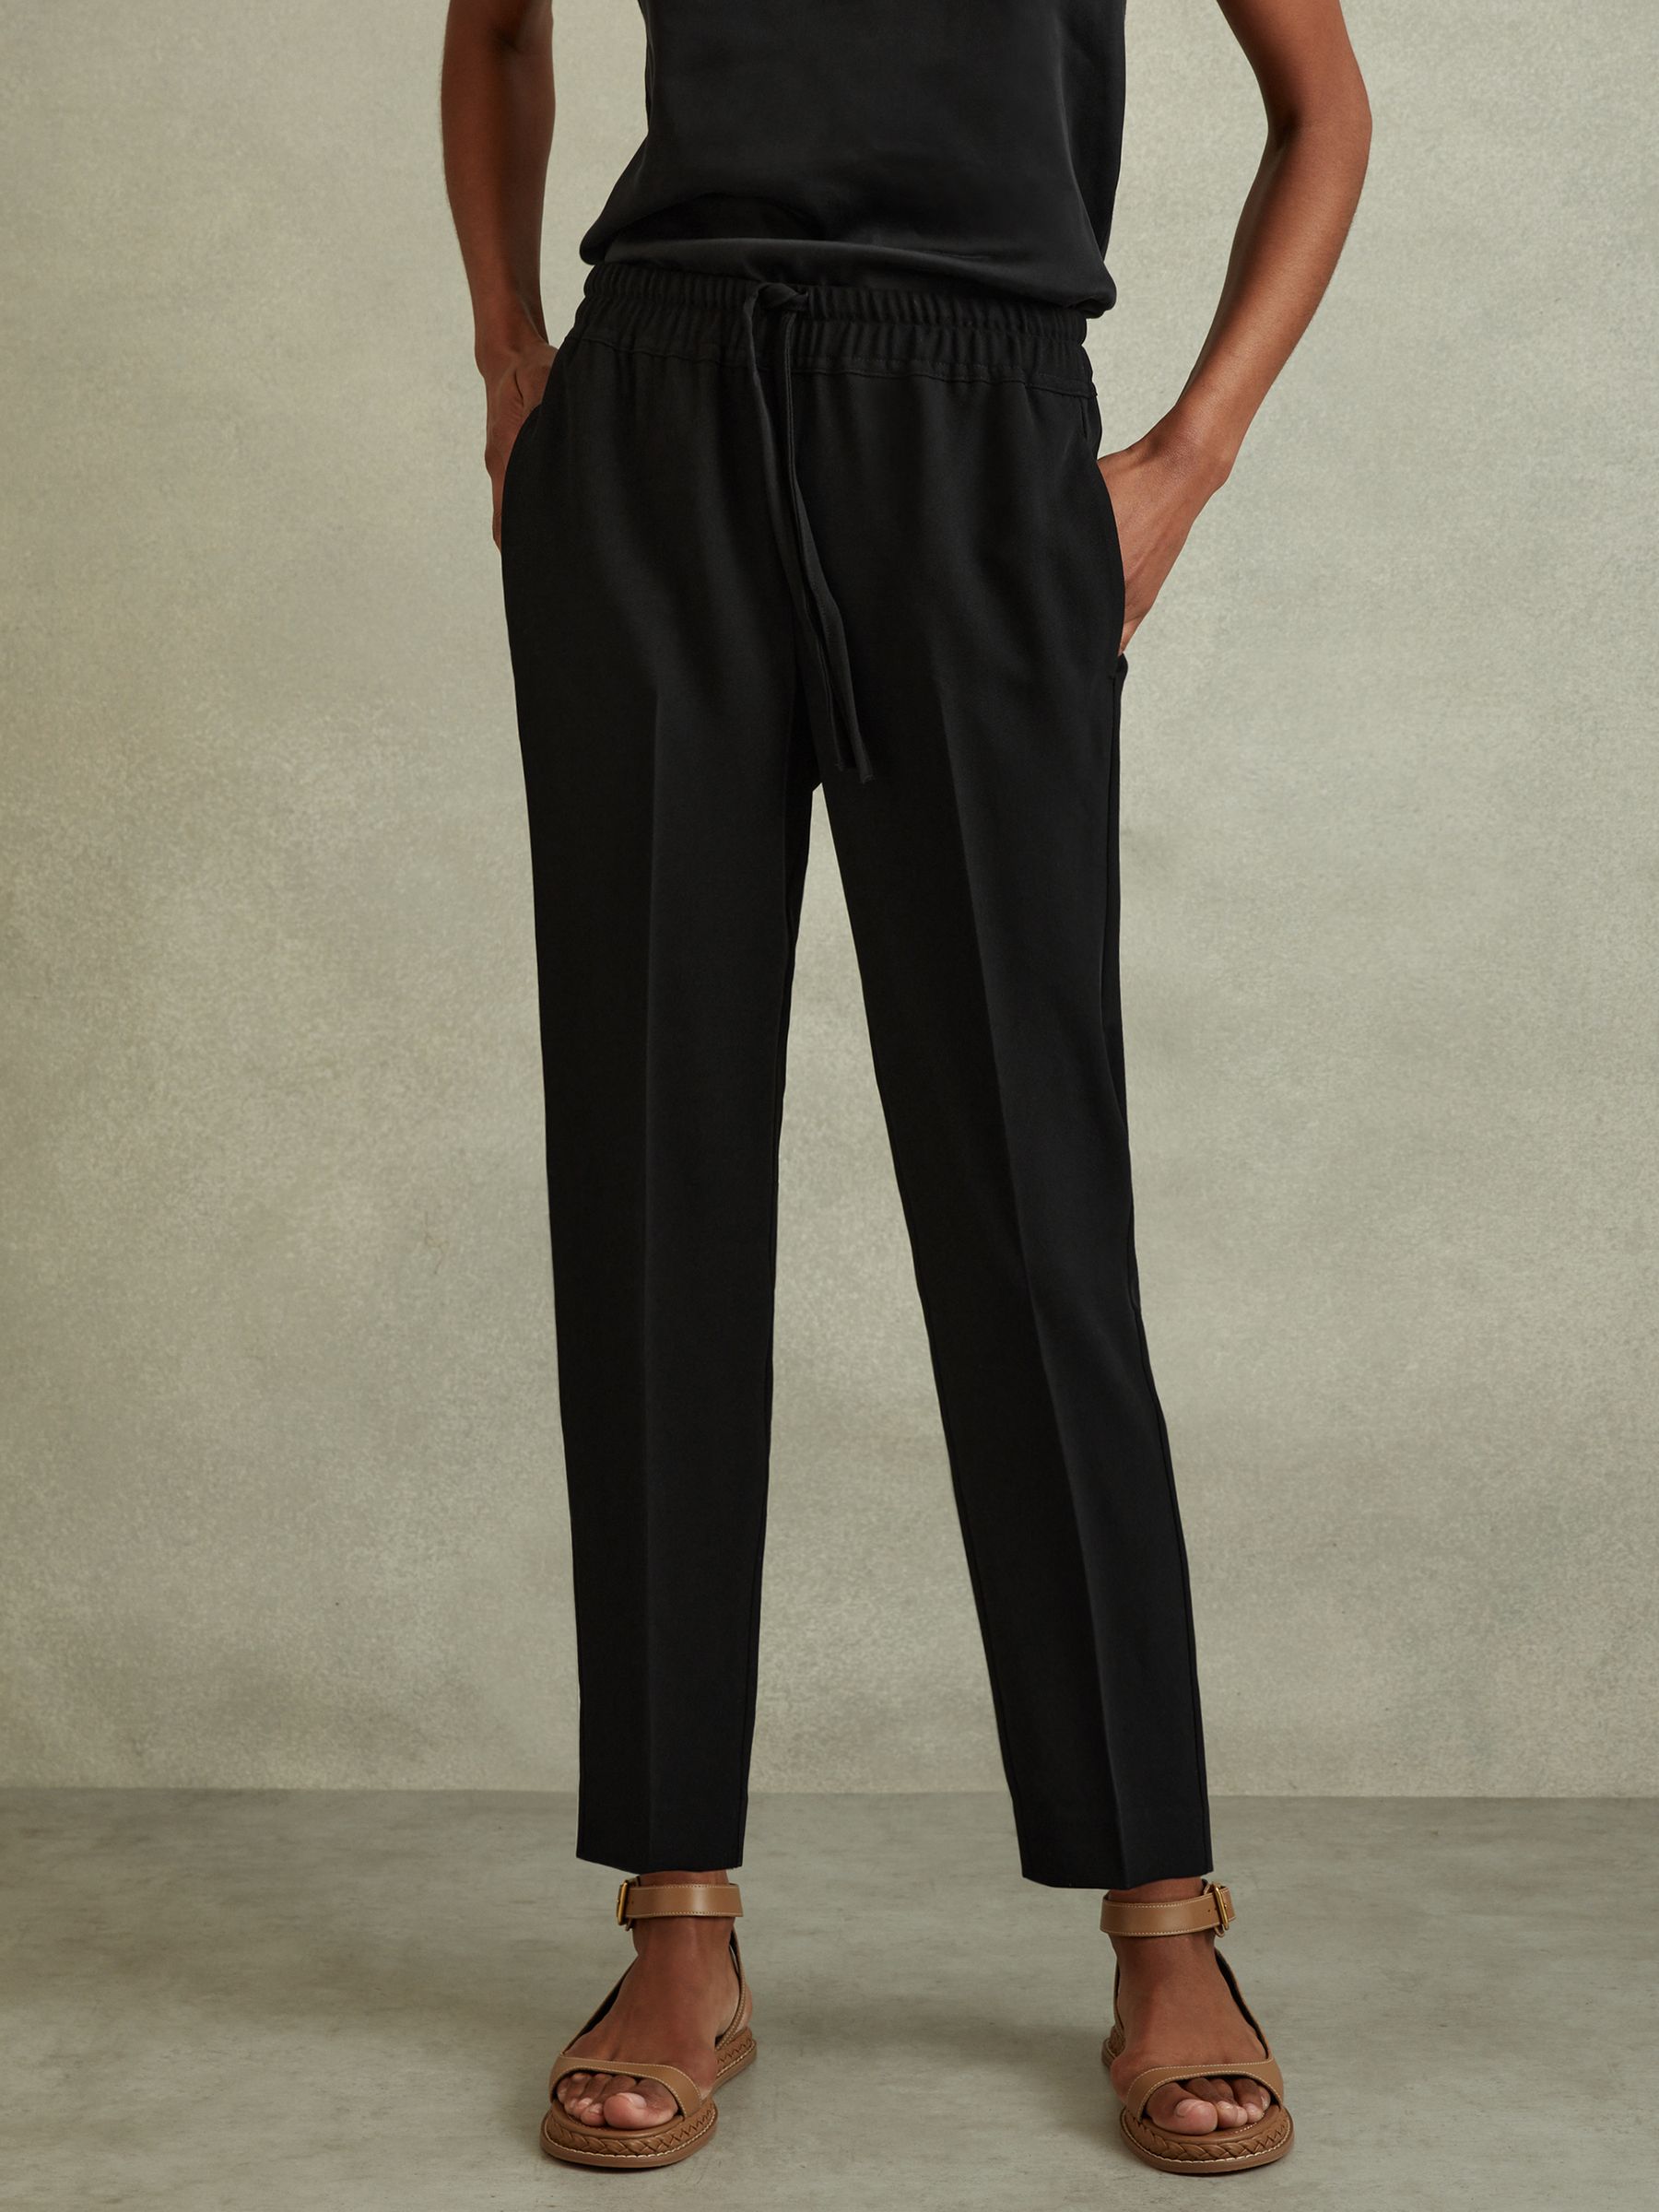 Reiss Hailey Pull On Trousers - REISS